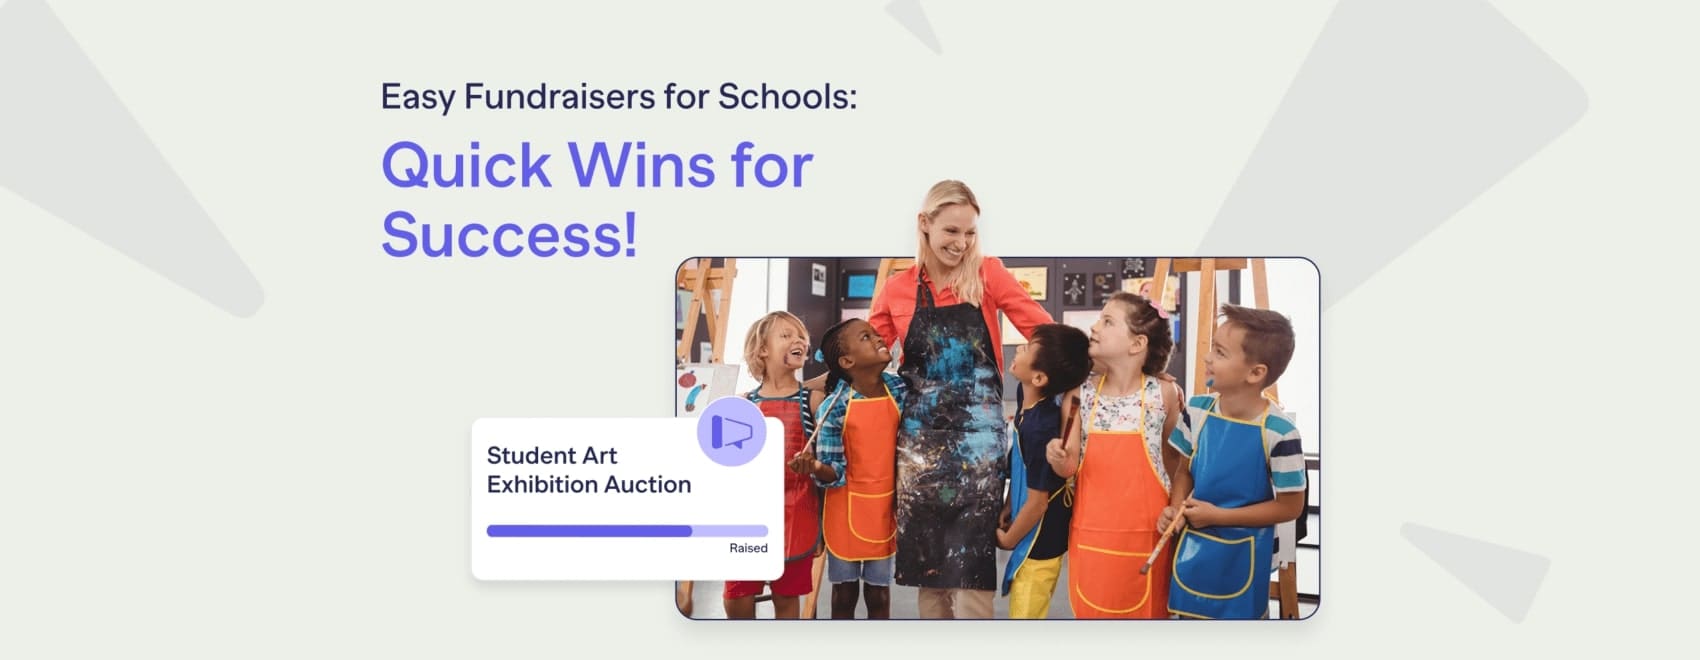 Easy Fundraisers for Schools Quick Wins for Success 1700x660